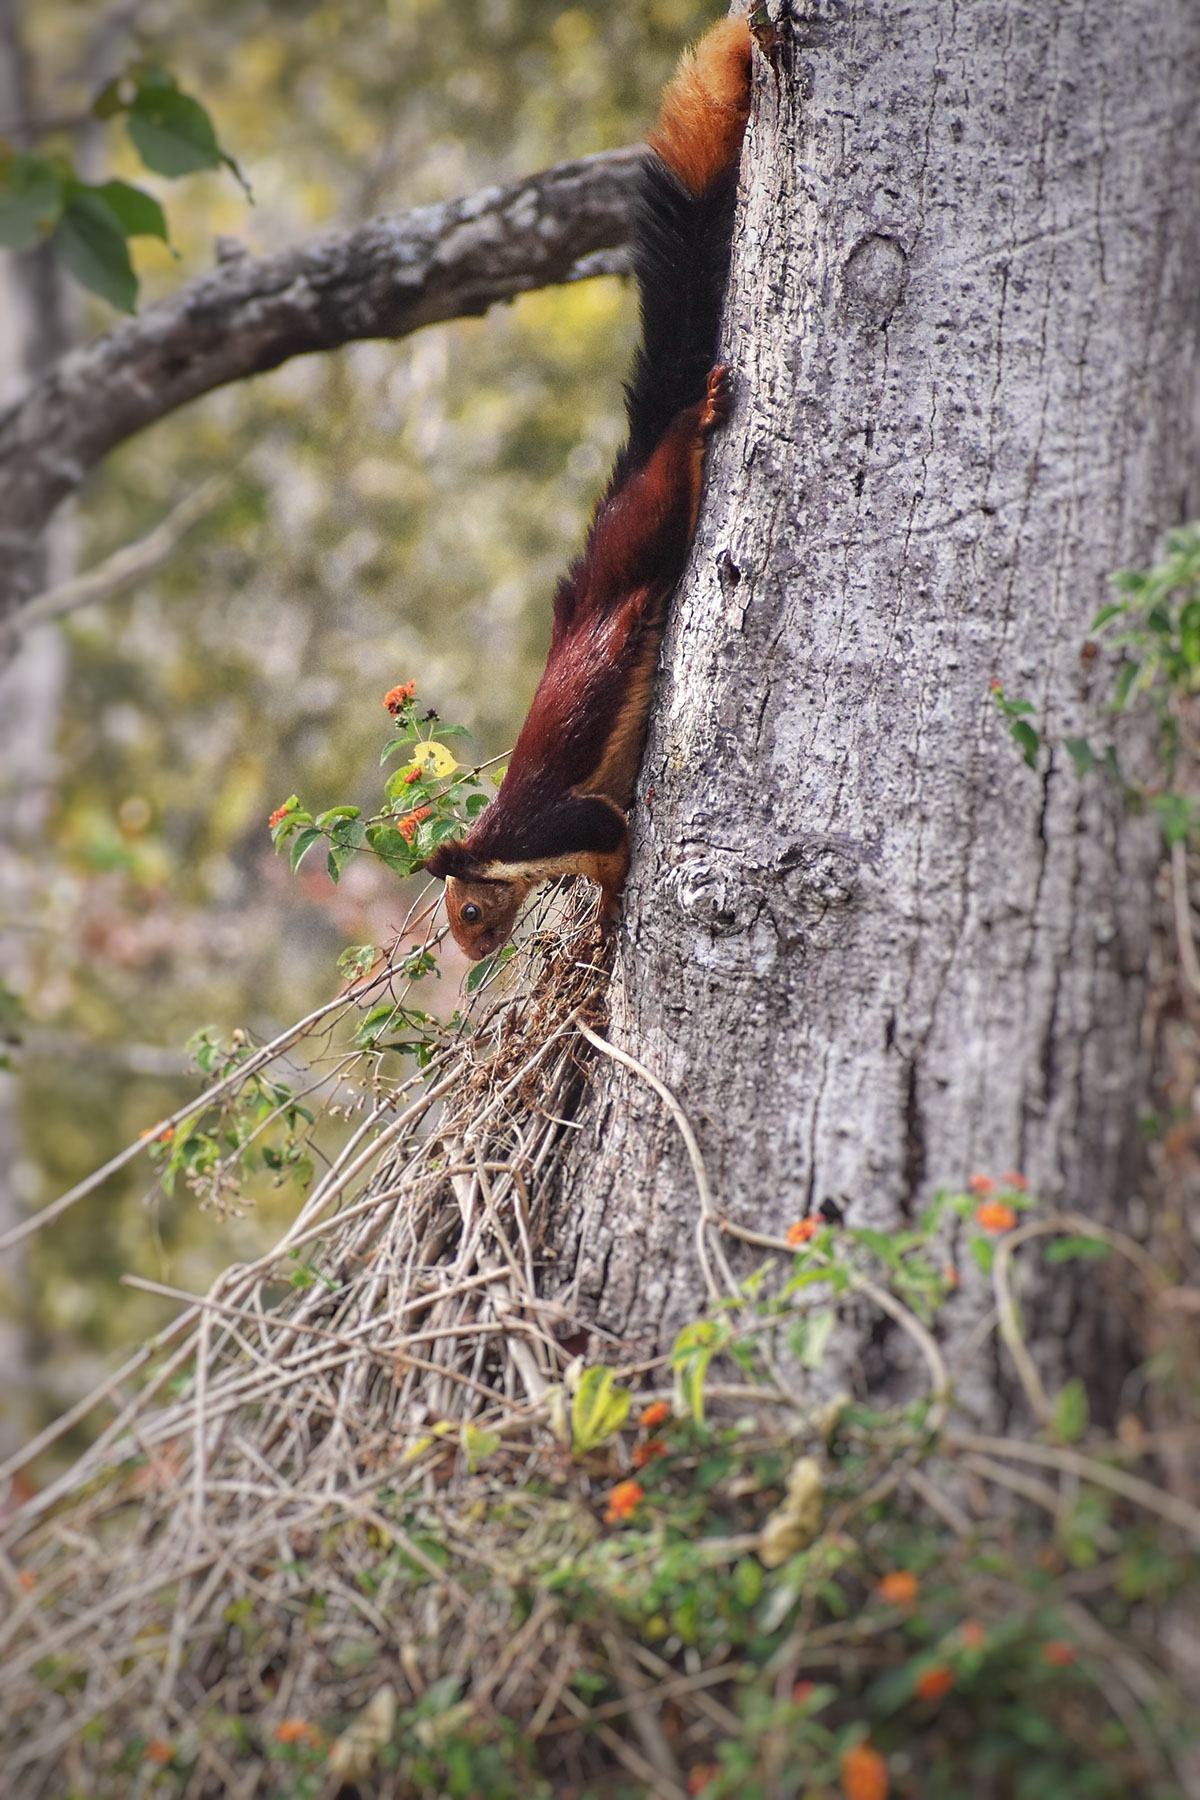 Indian Malabar Giant Squirrel - the most difficult species to photograph in Kabini